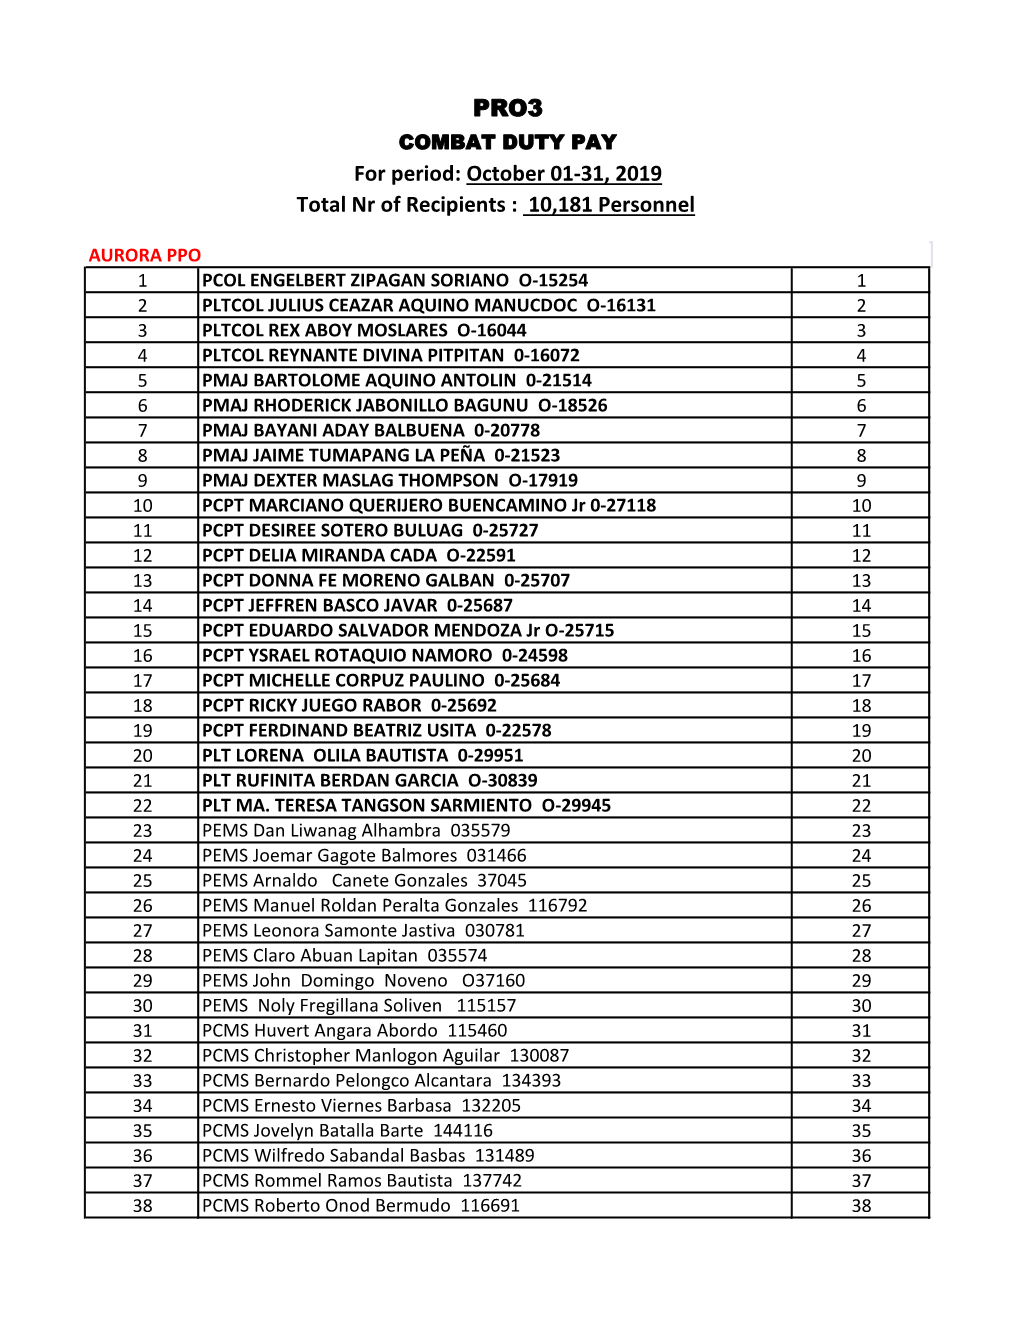 Total Nr of Recipients : 10,181 Personnel PRO3 for Period: October 01-31, 2019